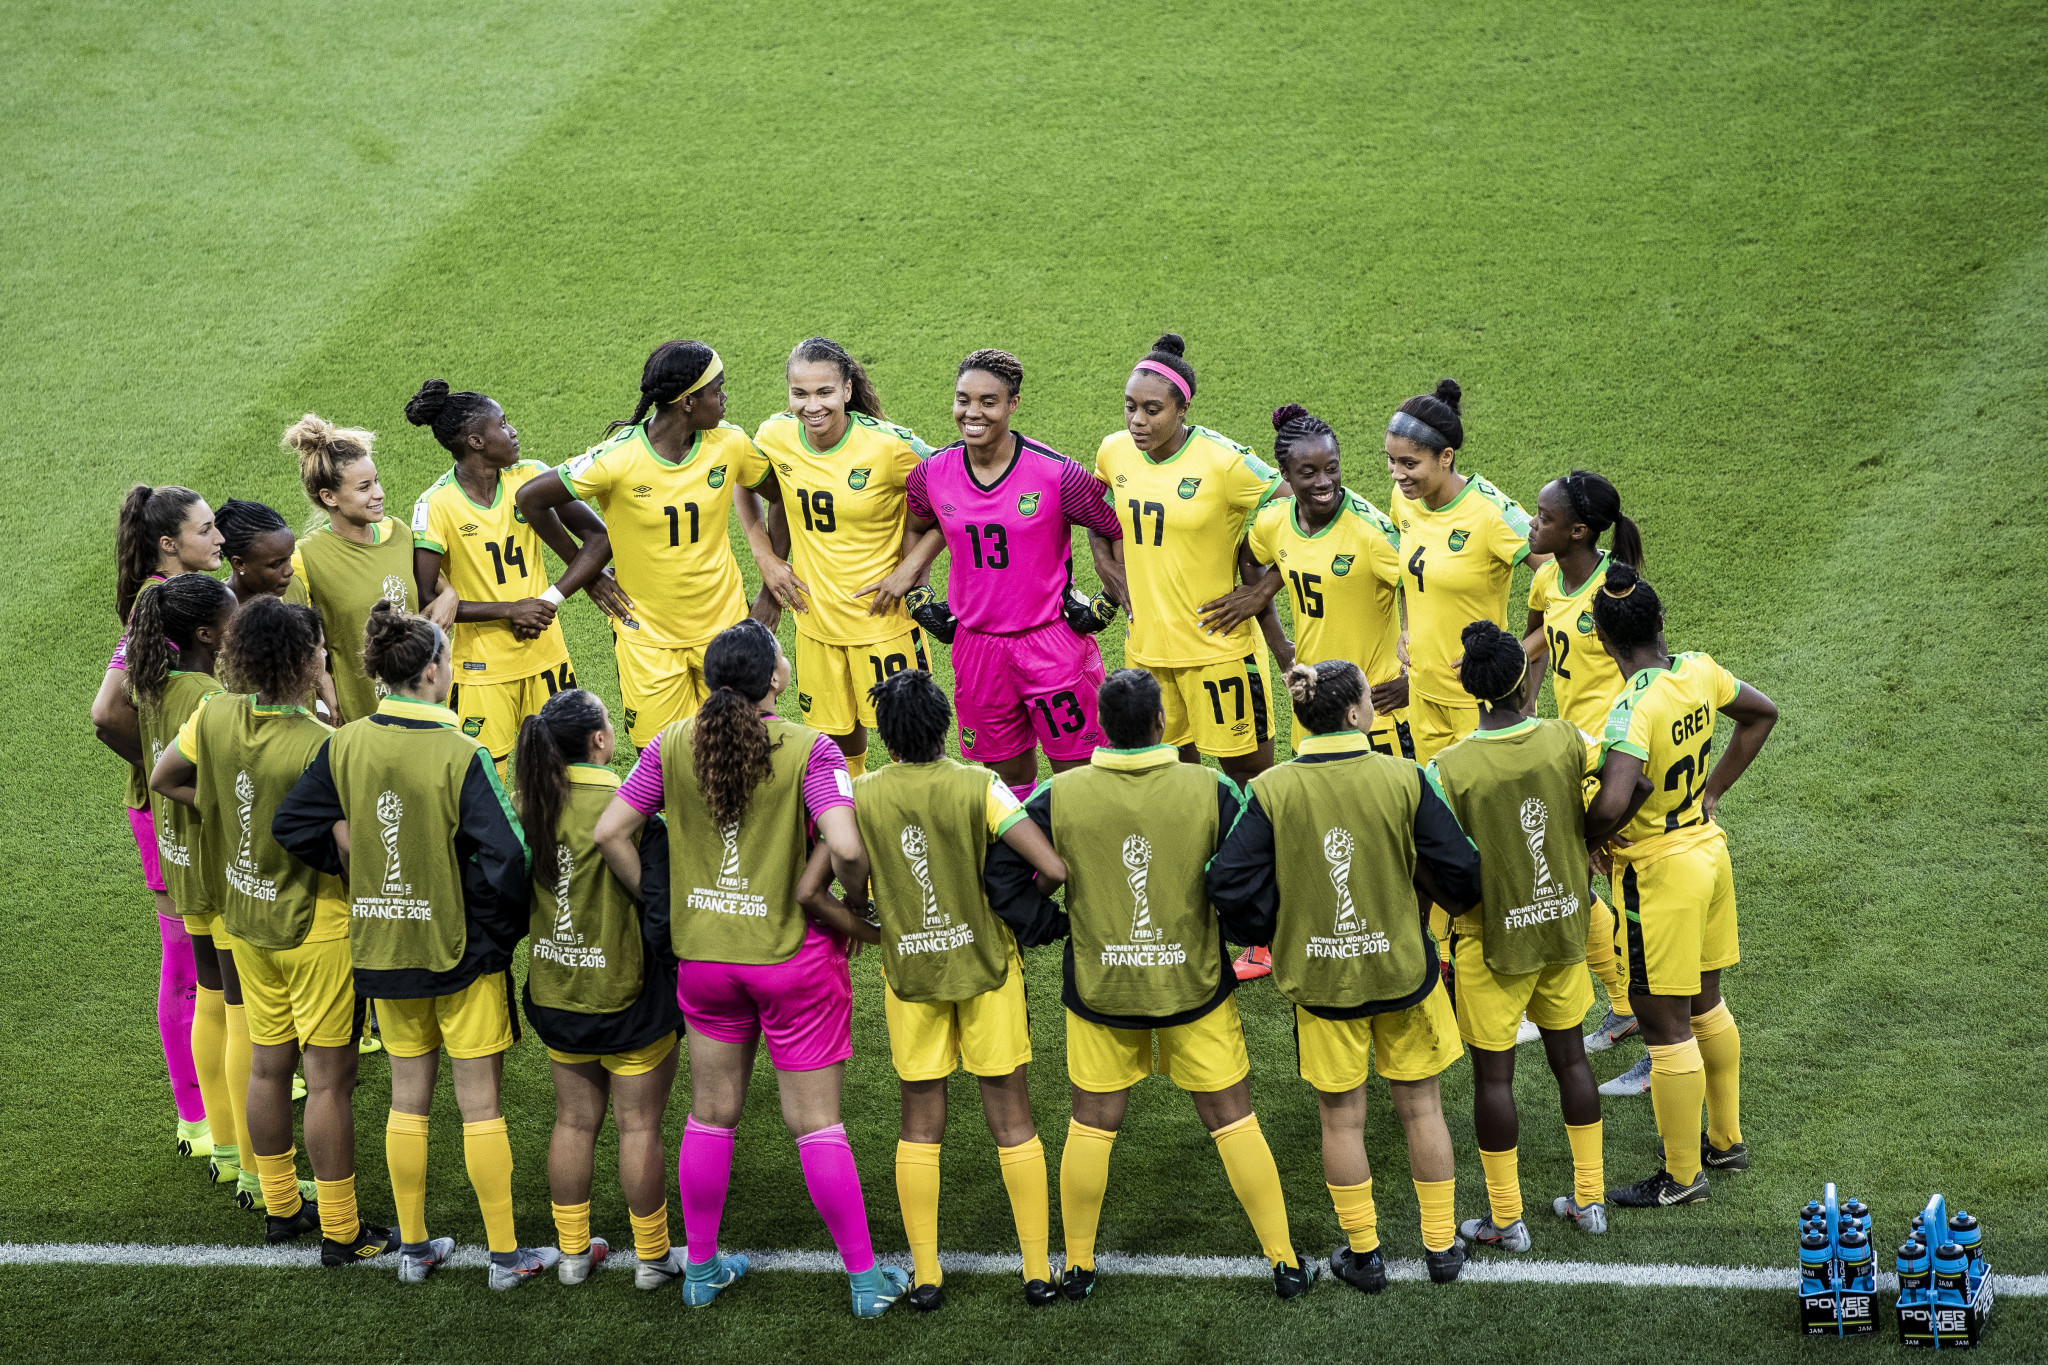 The Jamaican women's football team are still waiting for payment from the FIFA Women's World Cup, a story that has made headlines ©Getty Images